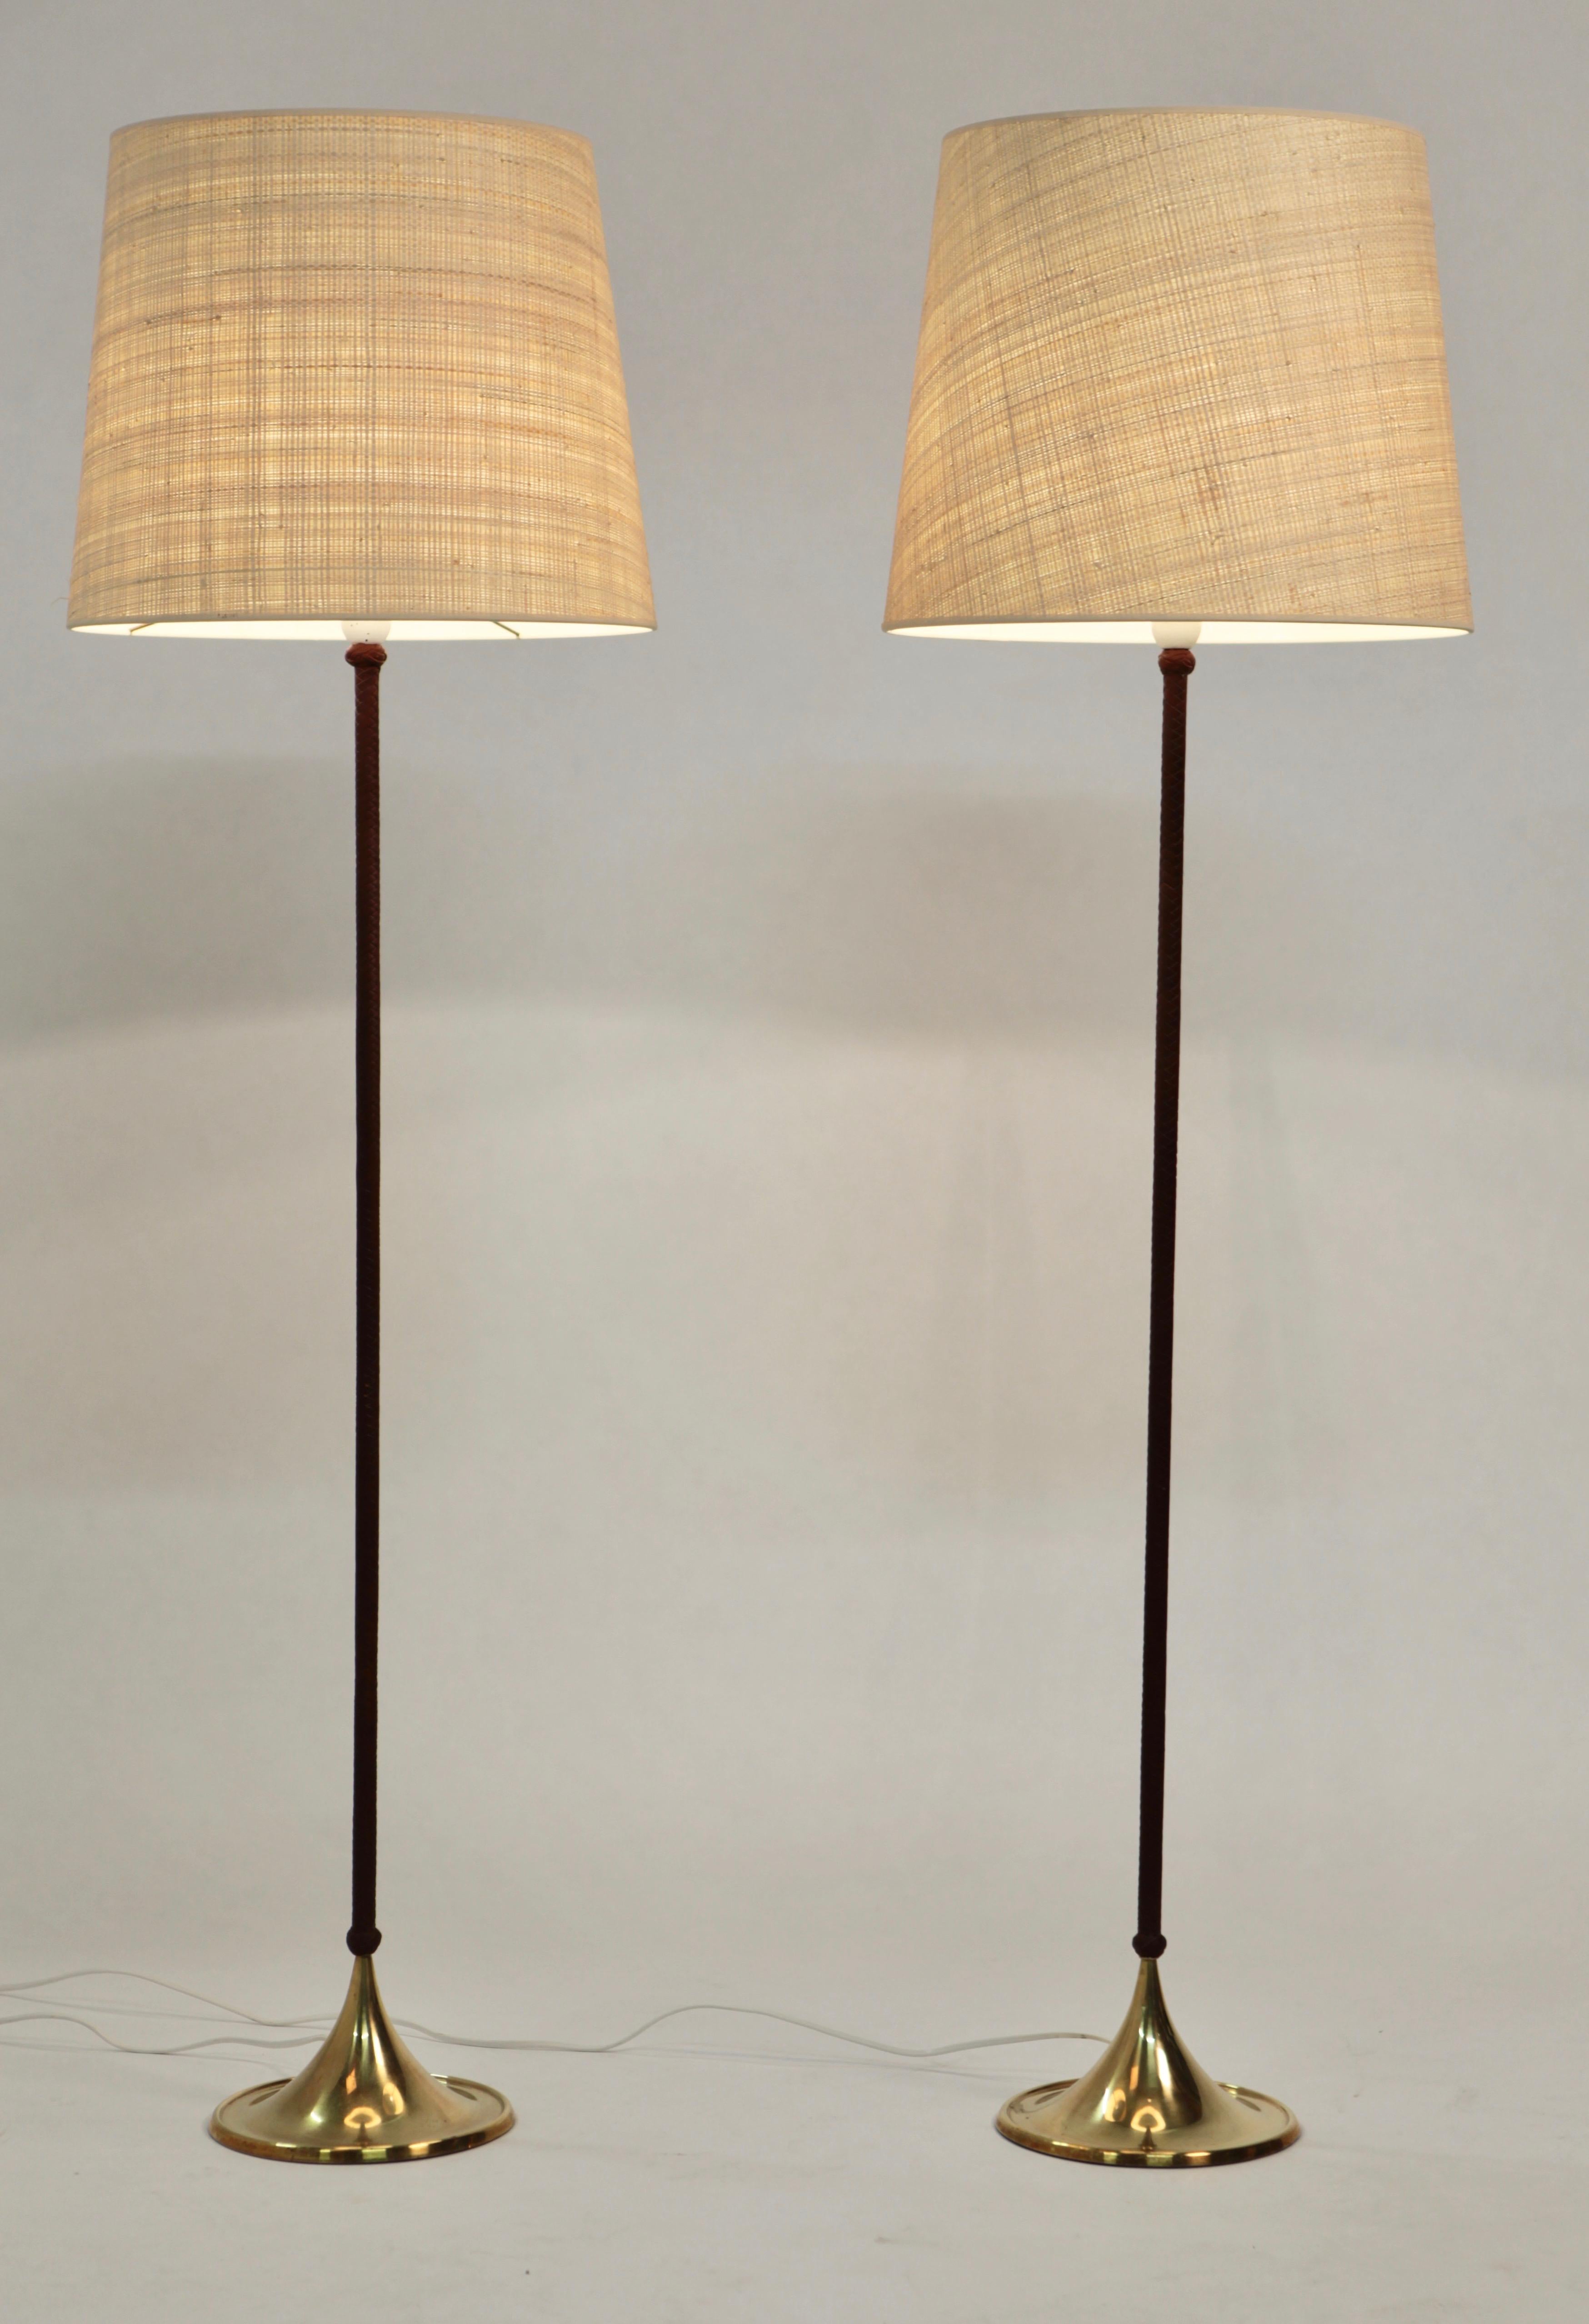 Mid-20th Century Pair of Rare Bergboms Floor Lamps, G-025, Brass and Leather, Sweden, 1950s